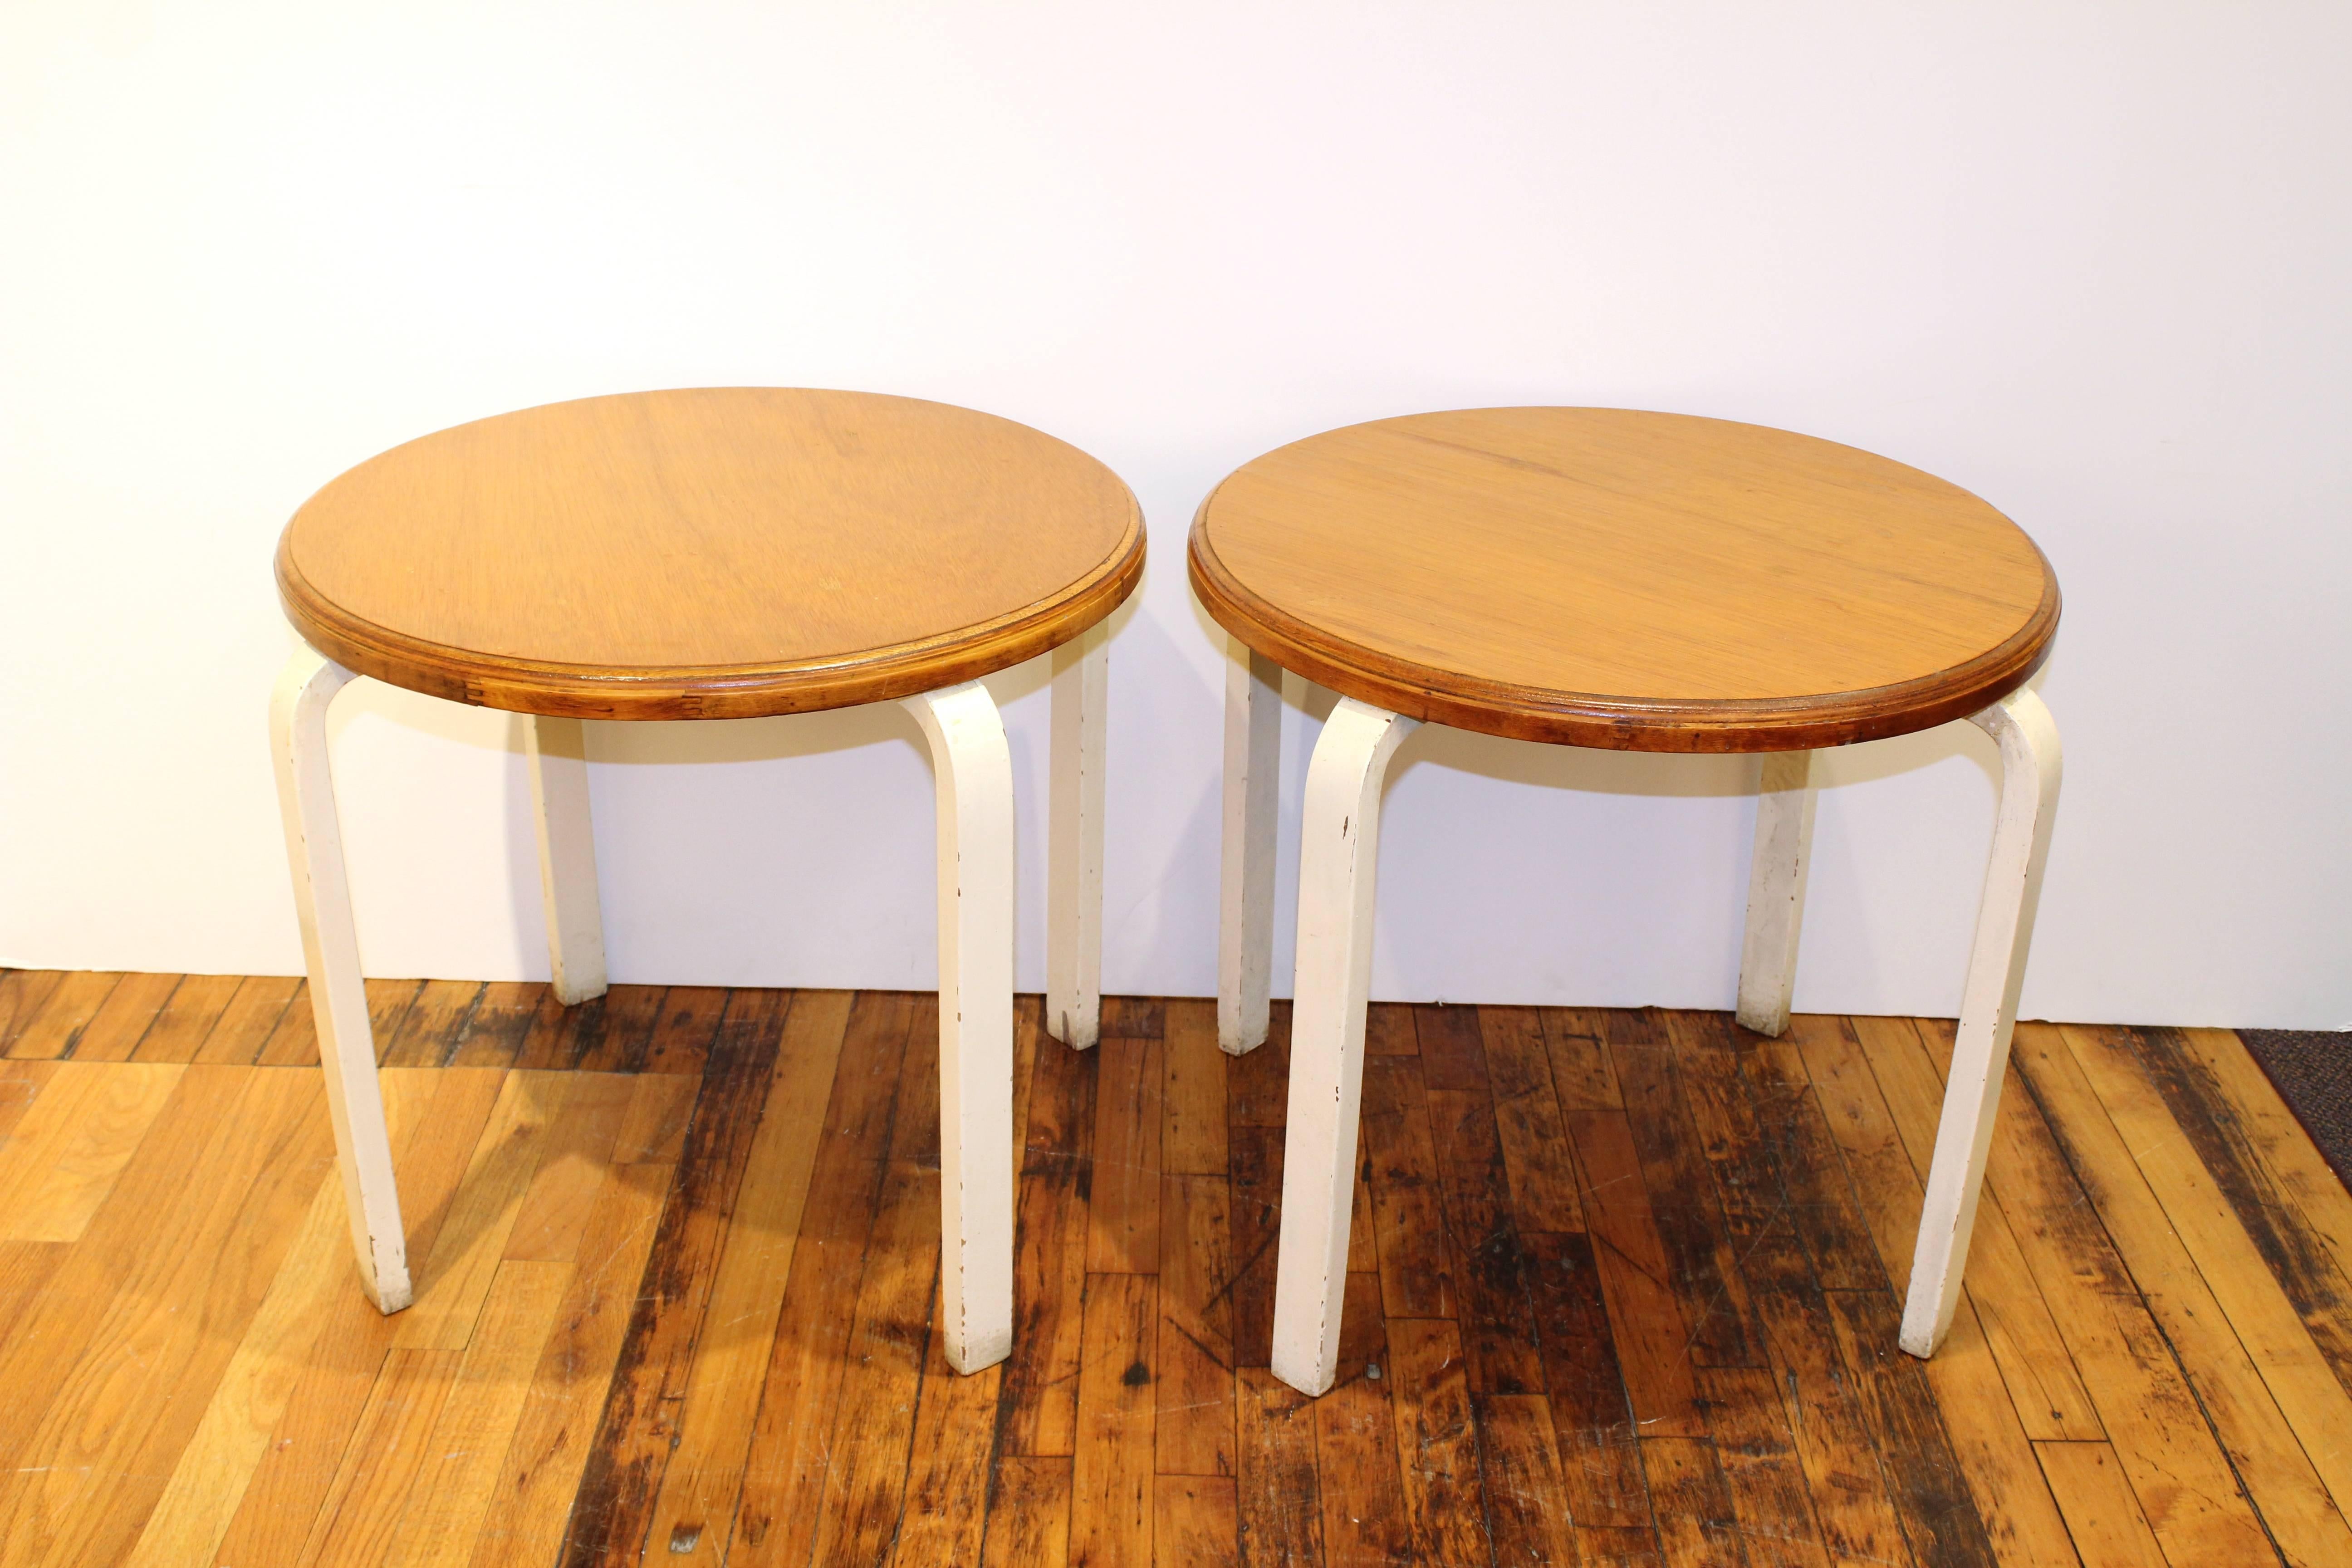 Pair of side tables designed by Alvar Aalto with circular light wood tops and white painted steam bent legs. 

110477
